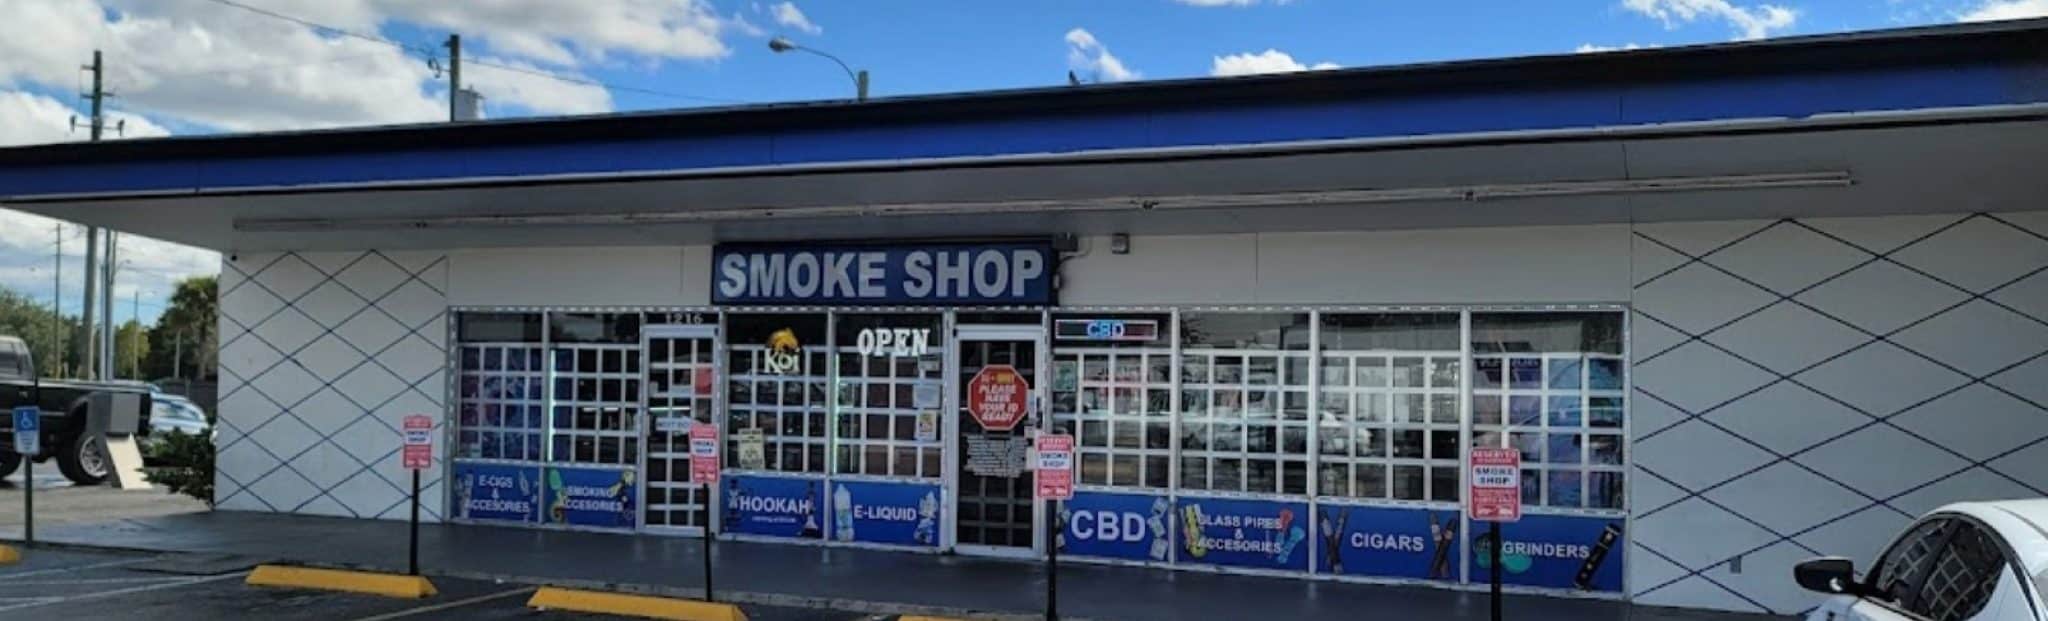 image of kissimmee smoke shop in kissimmiee fl